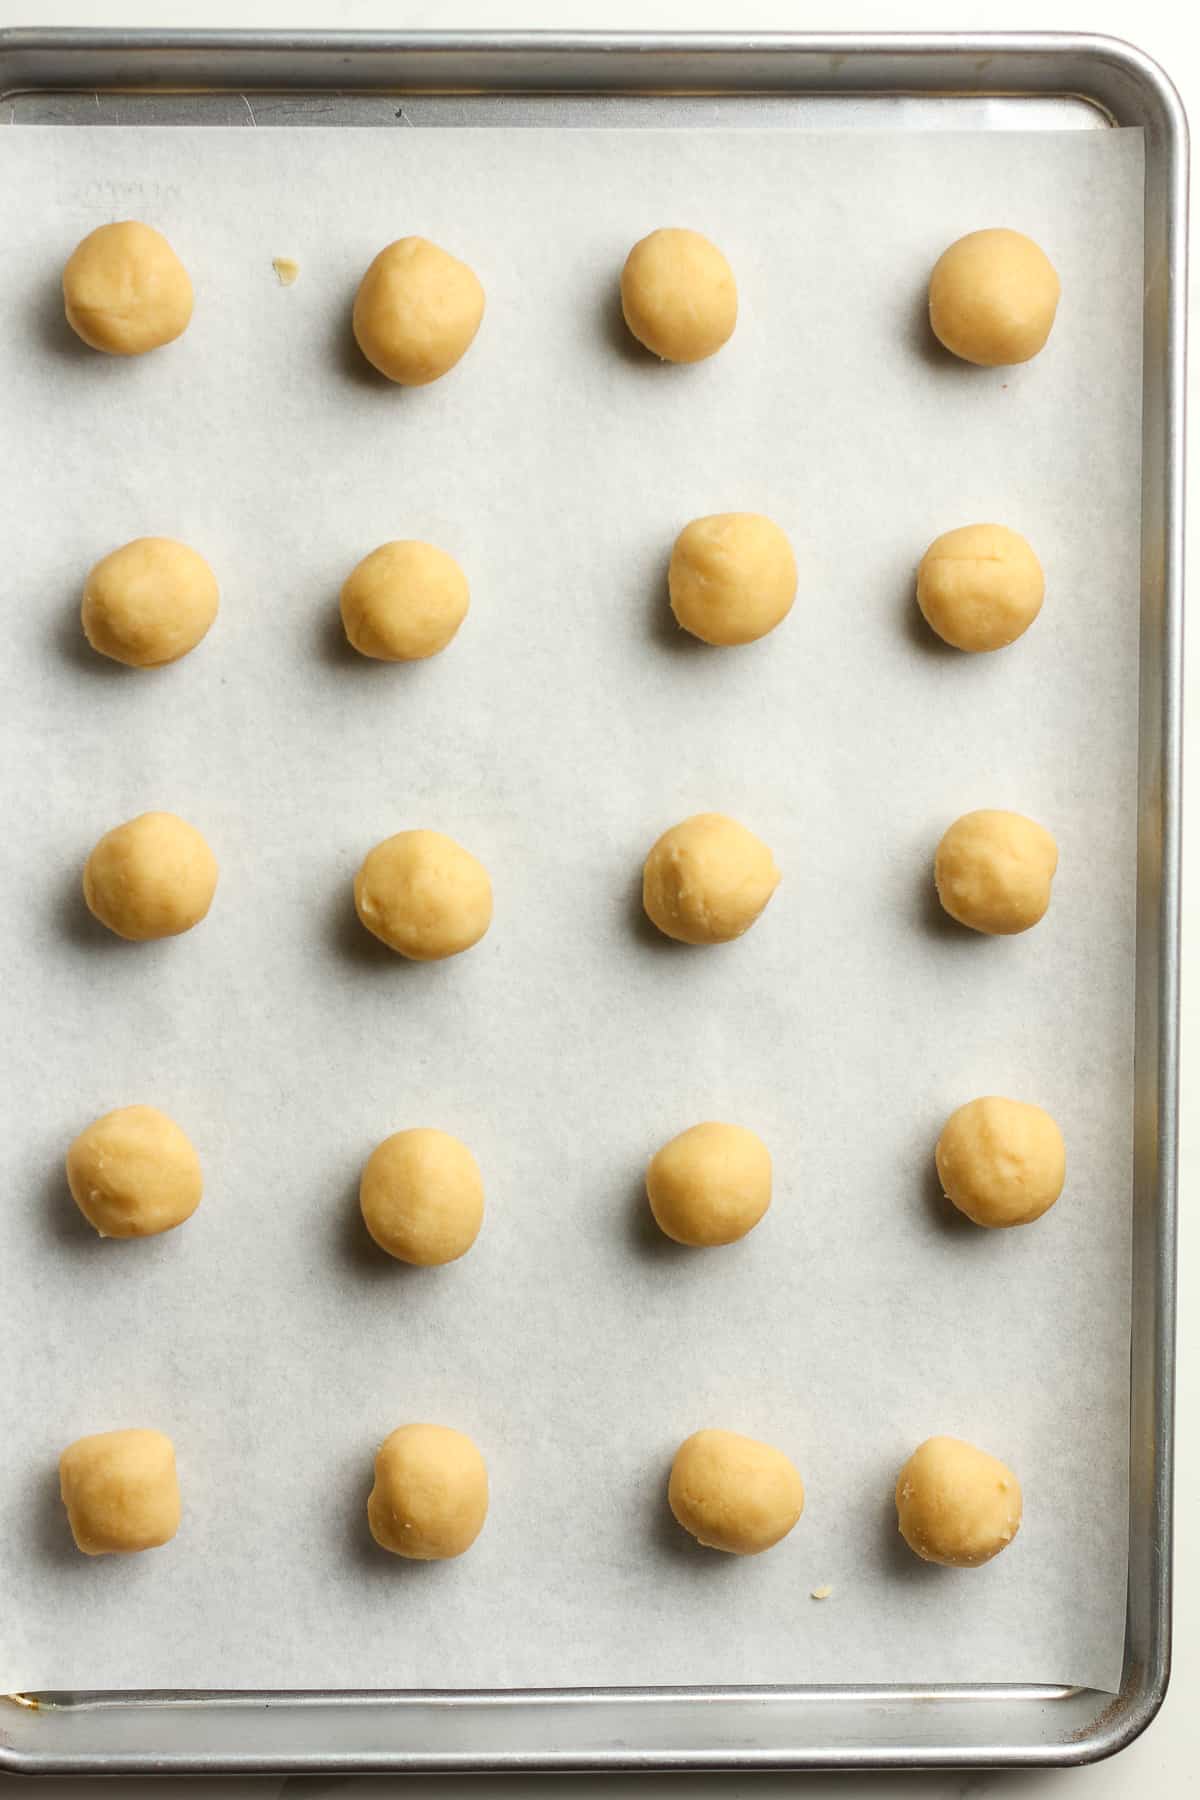 A baking sheet with 20 one-inch balls spread out evenly.